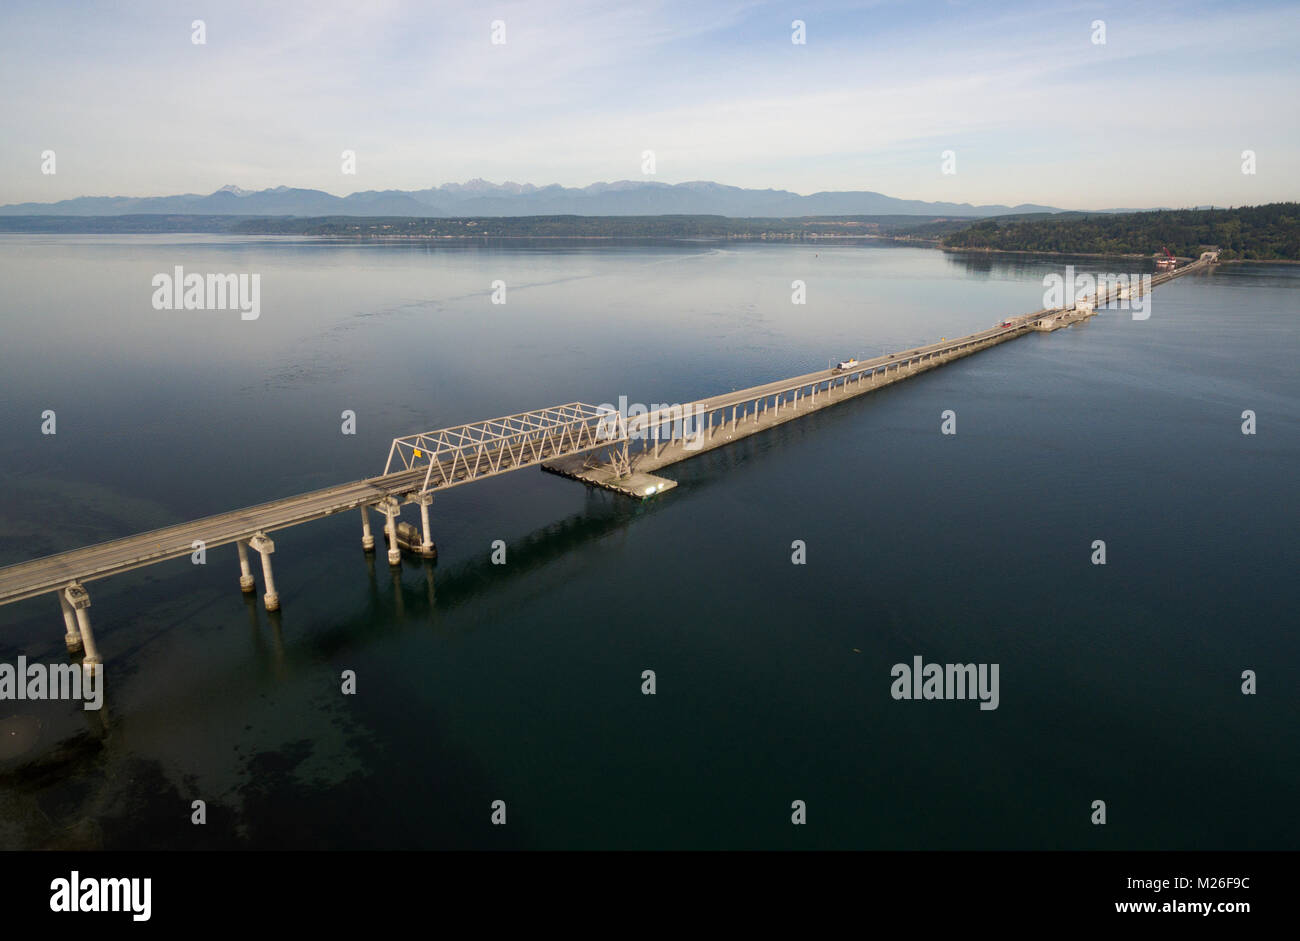 Commuters move across the Puget Sound on the Hood Canal Bridge connecting Olympic and Kitsap Peninsulas Stock Photo